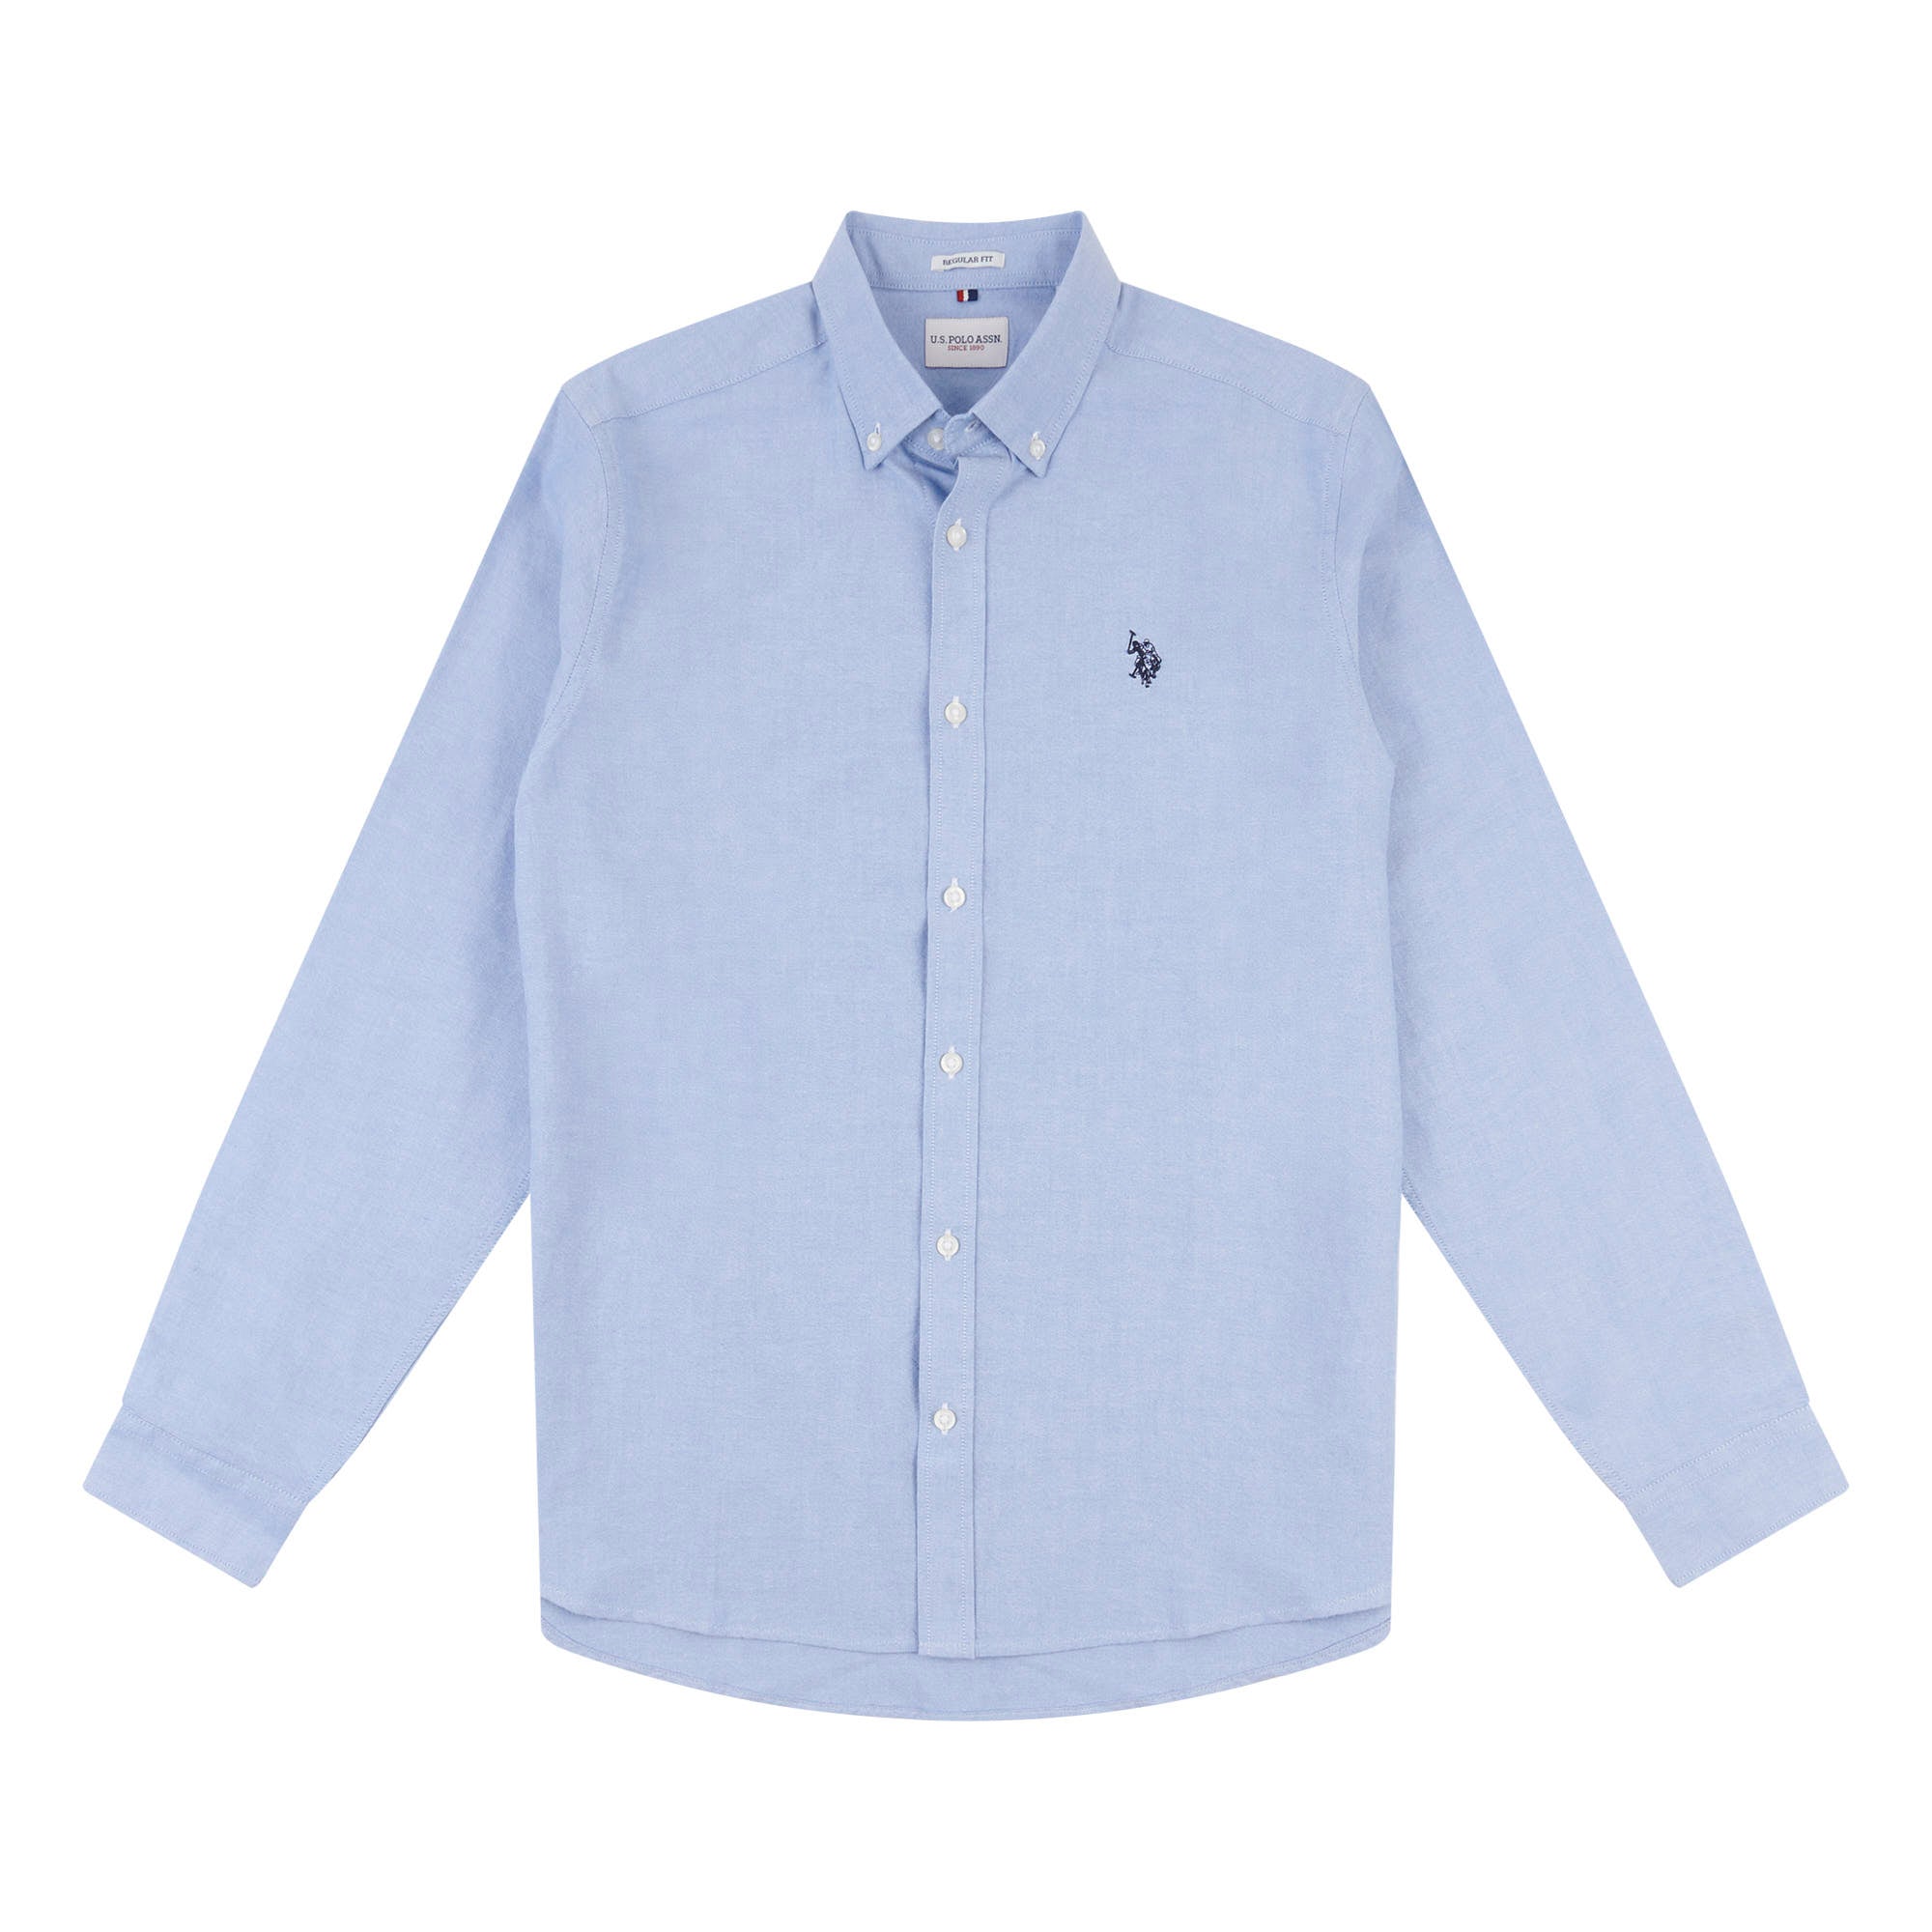 Mens Peached Oxford Shirt in Blue Yonder